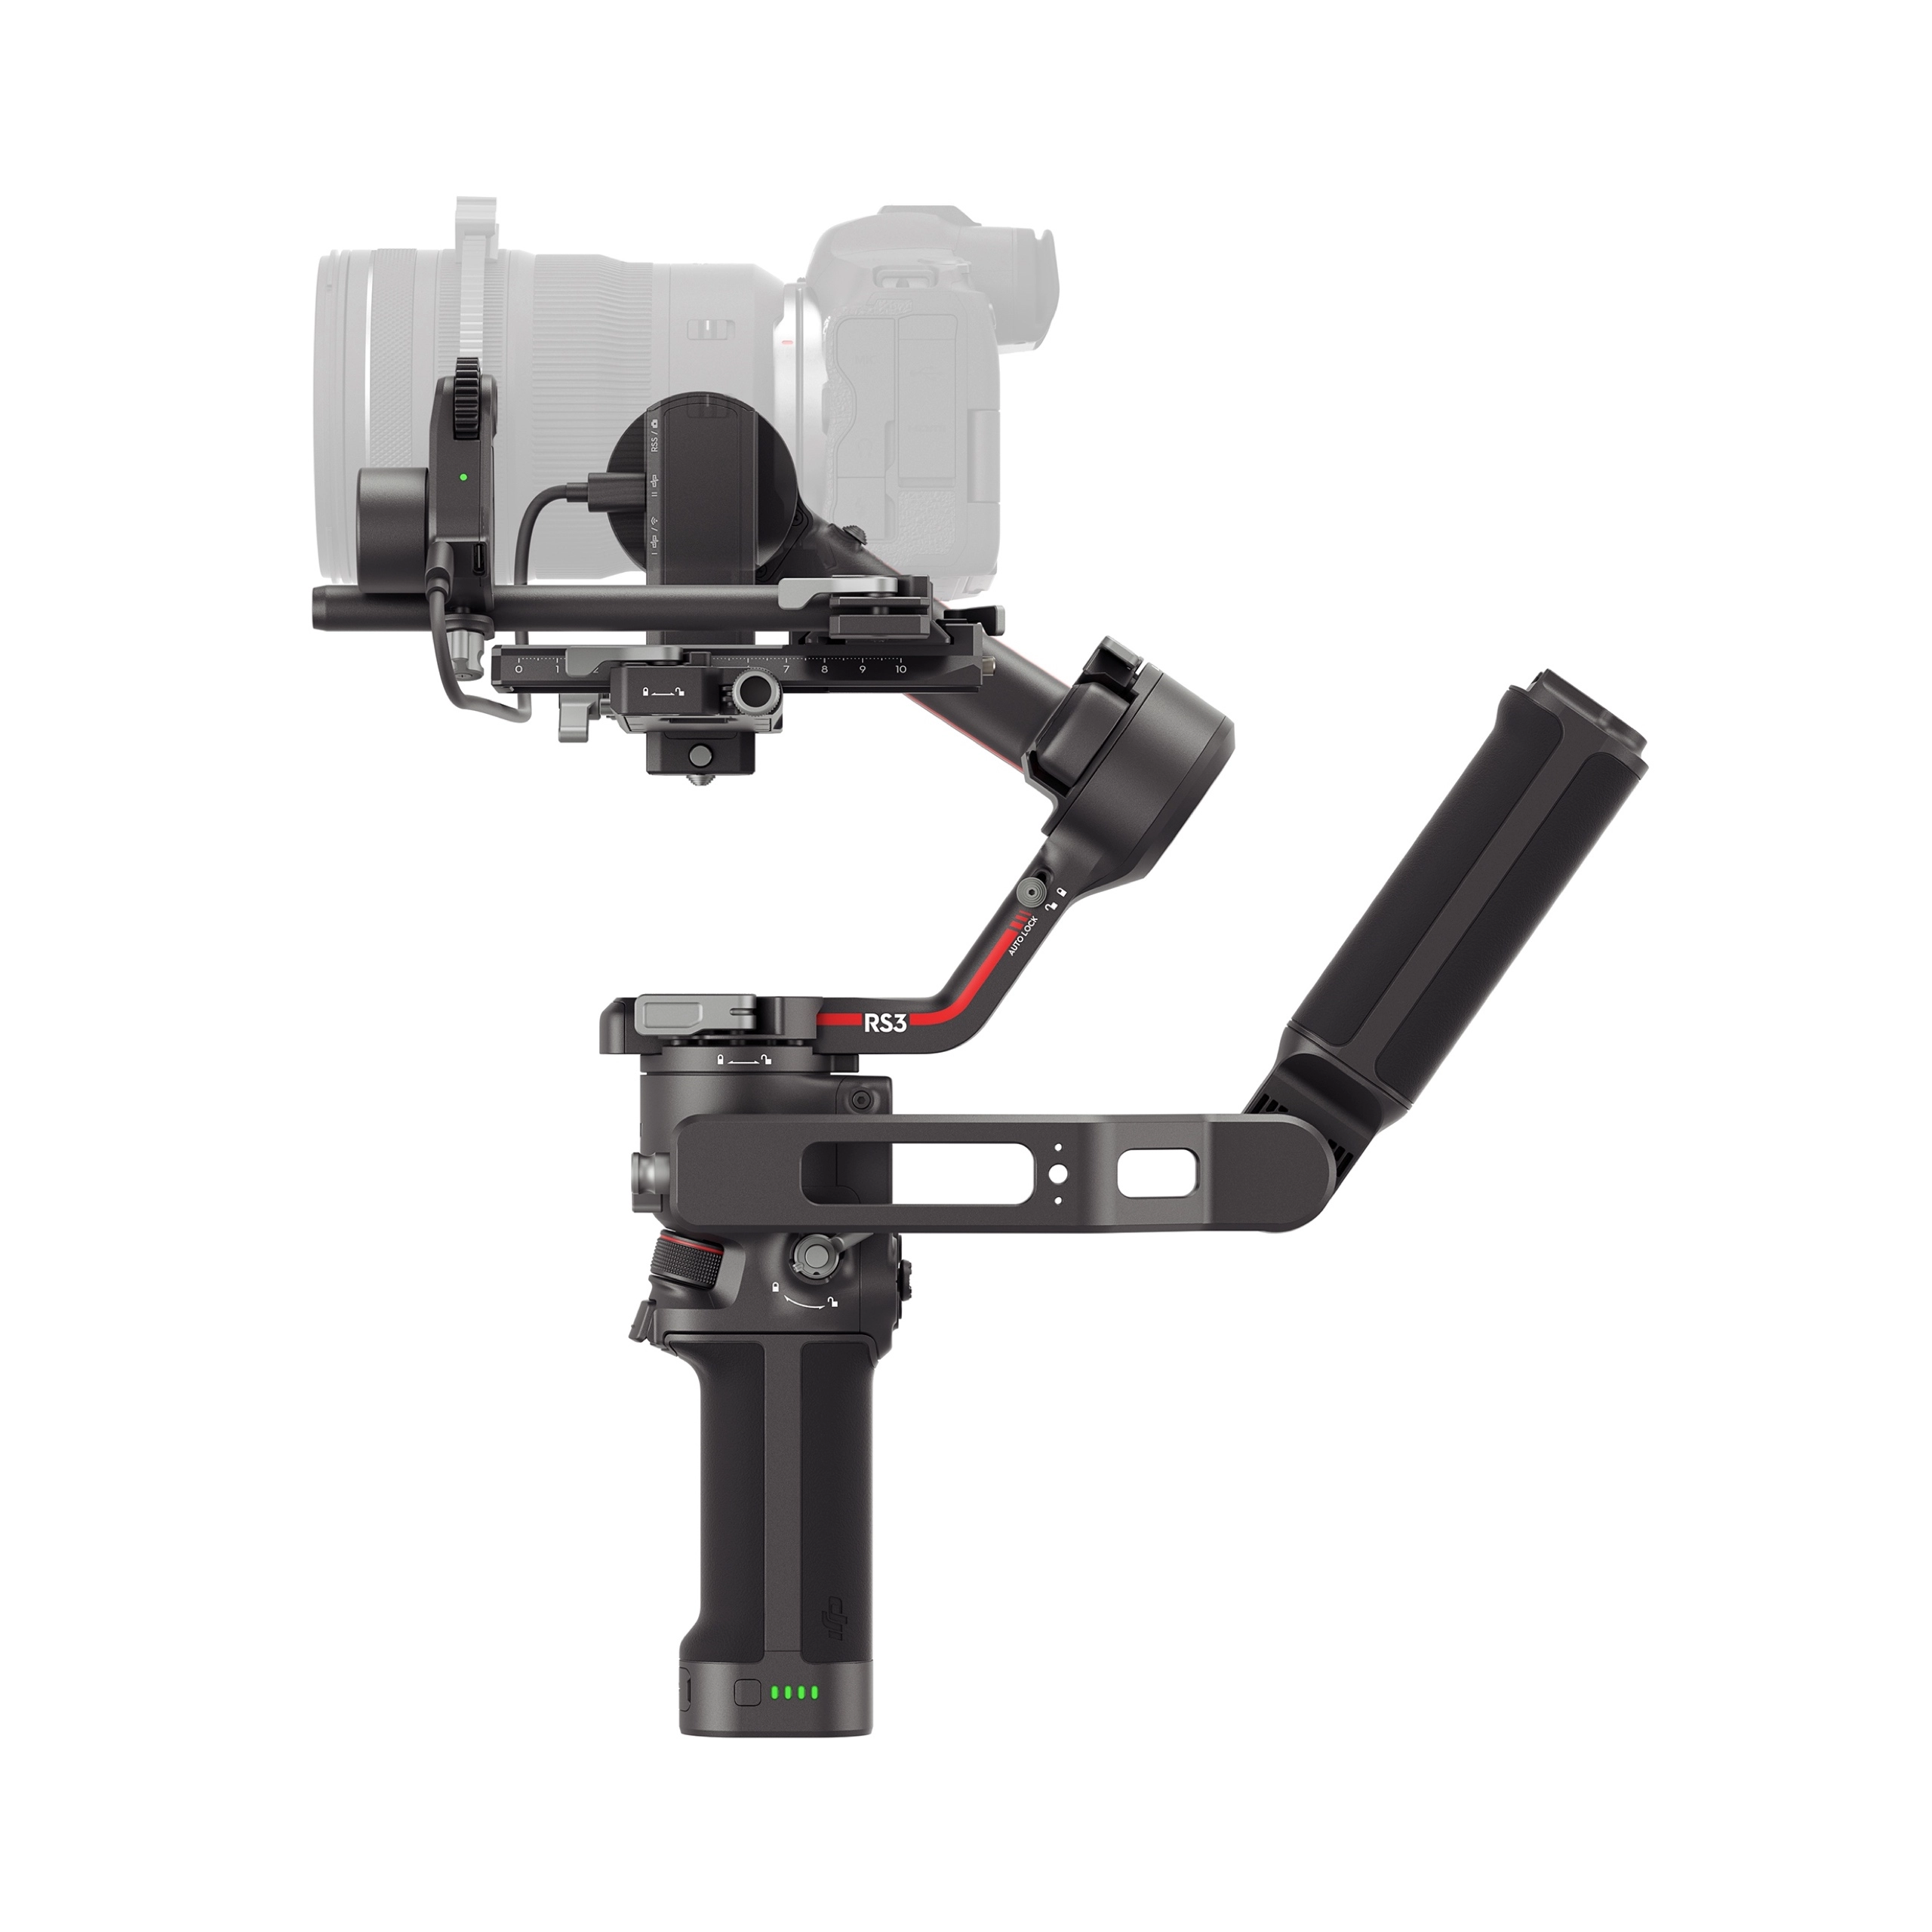 (930767) DJI RS3 Combo - Camera Stabilizer for Mirrorless and DSLR cameras, Payload 3.0 kg, Axis (Automated locks, carbon+plastic),3Gen Stab.,Shutter connection (bluetooth, cable), 1.8'' OLED full-color touchscreen,Gimbal mode switch,Mini tripod, Focus Mo